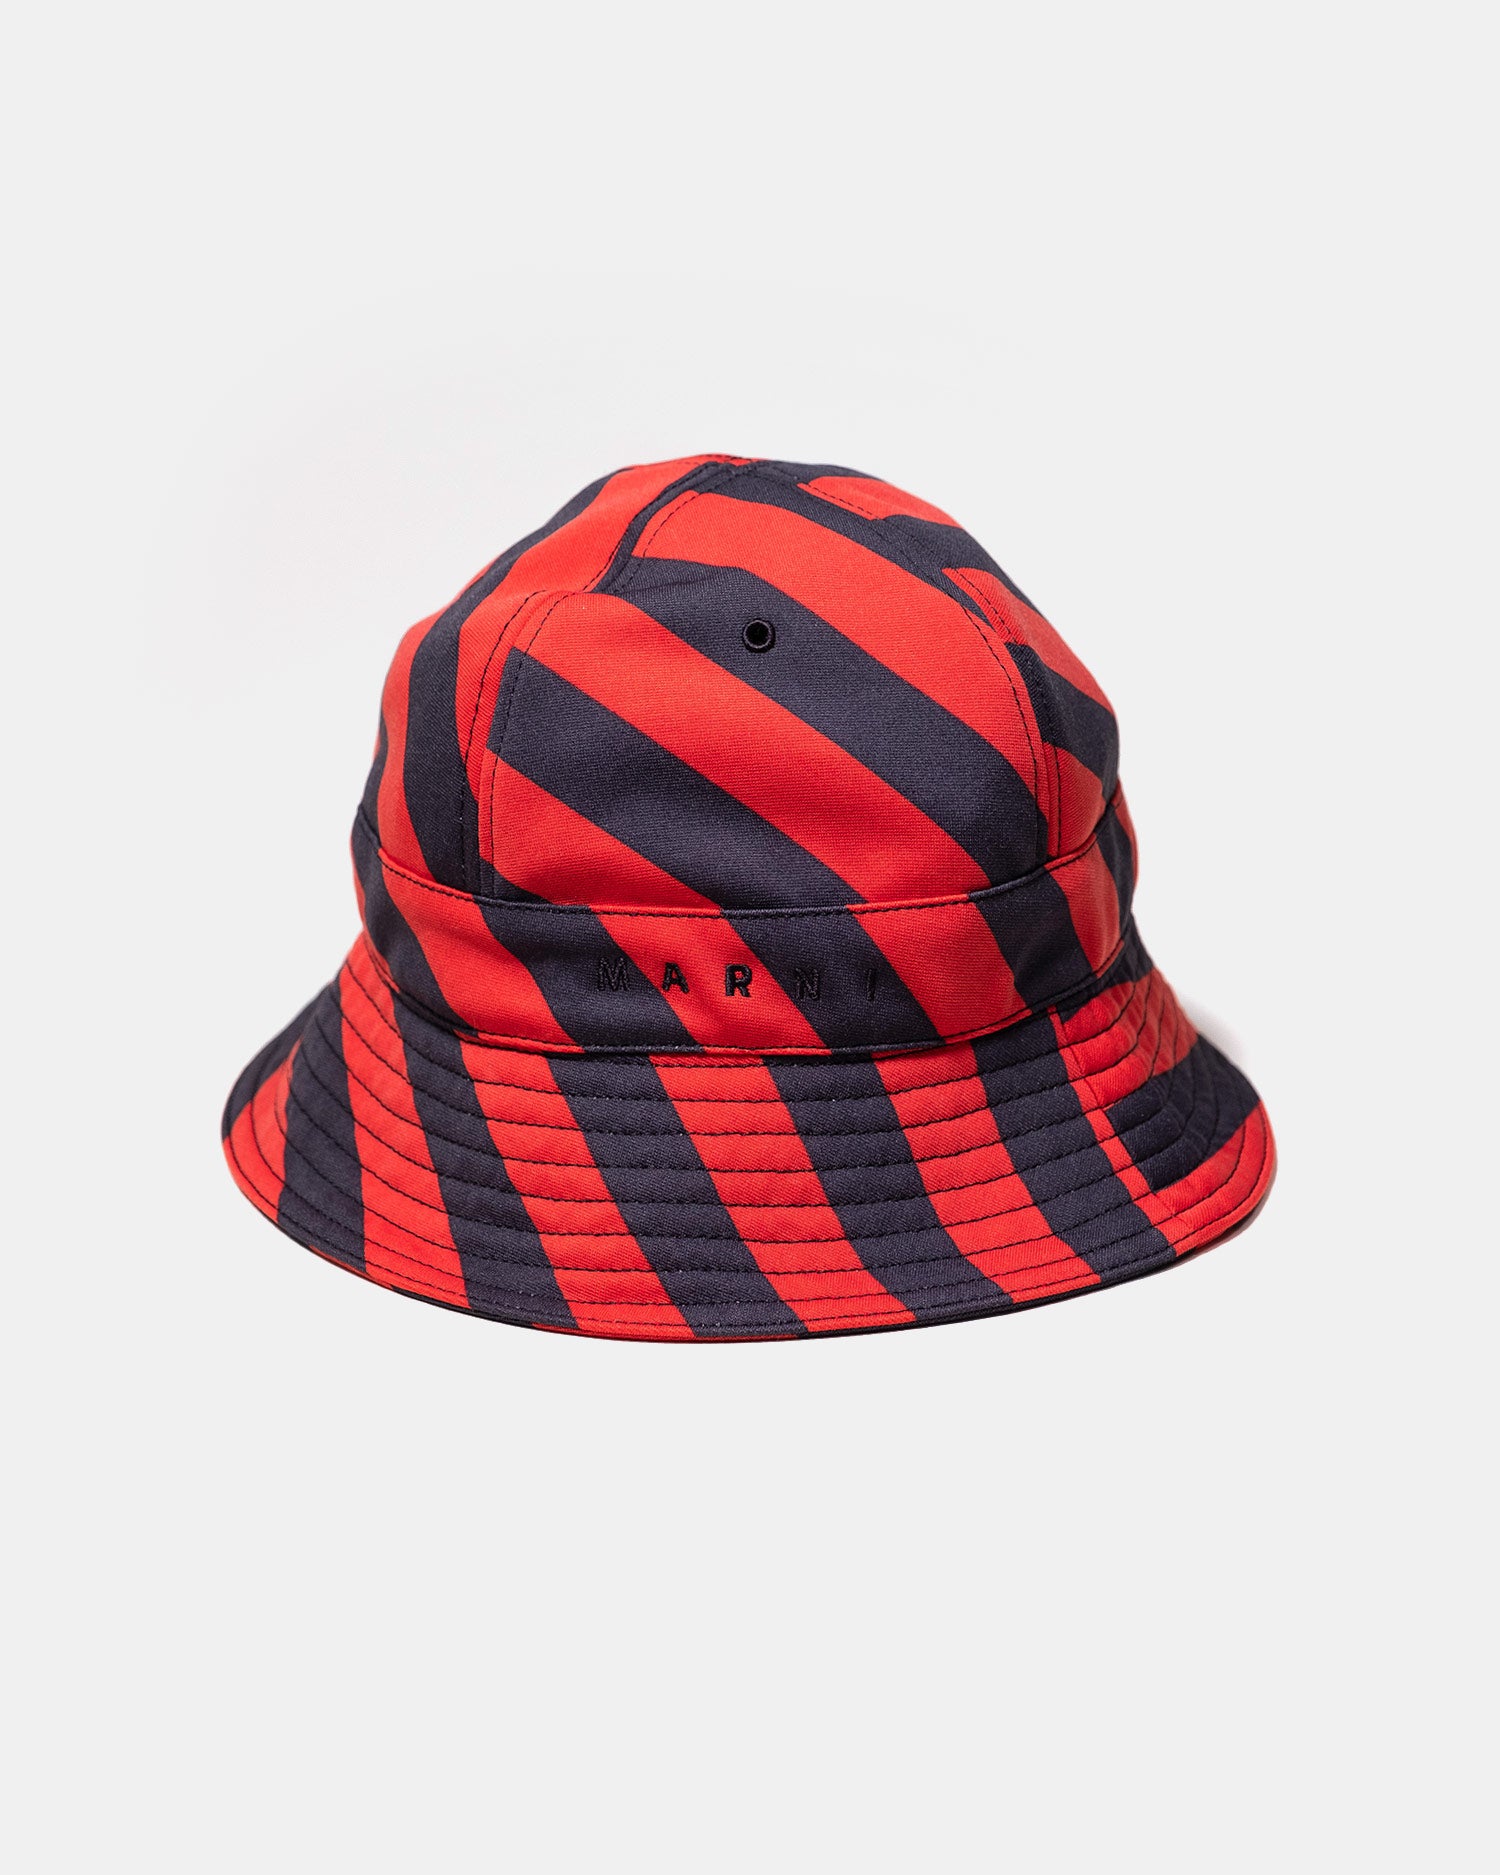 Marni Bucket Hat in Striped Red & Grey Cotton Fabric- Made in Italy ...